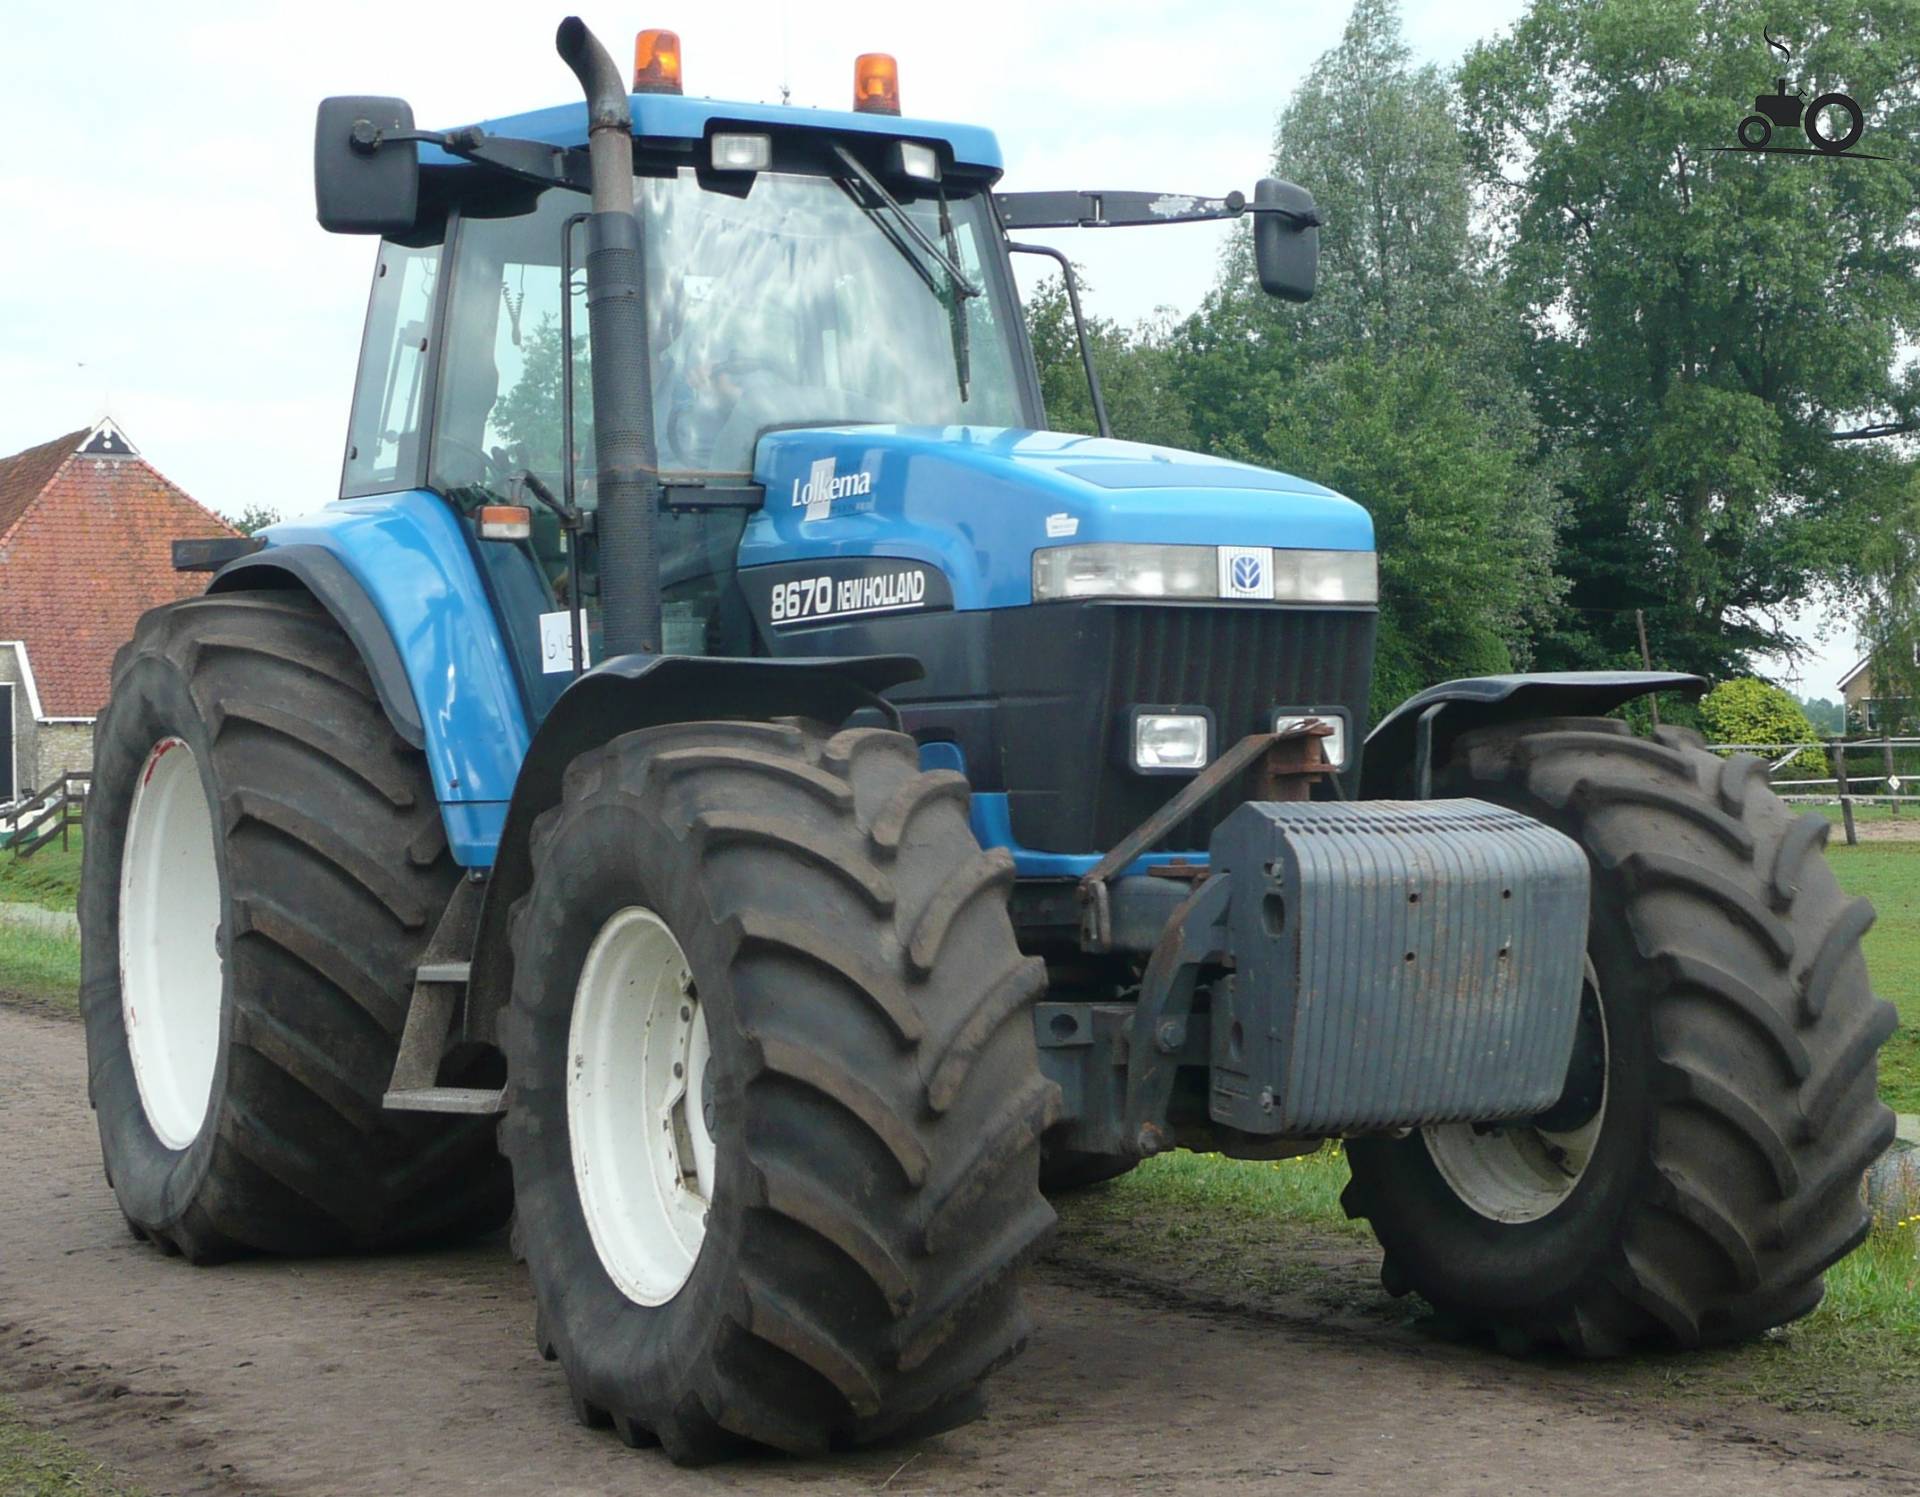 Related to New Holland 8670 Used New Holland 8670 New Holland 8670